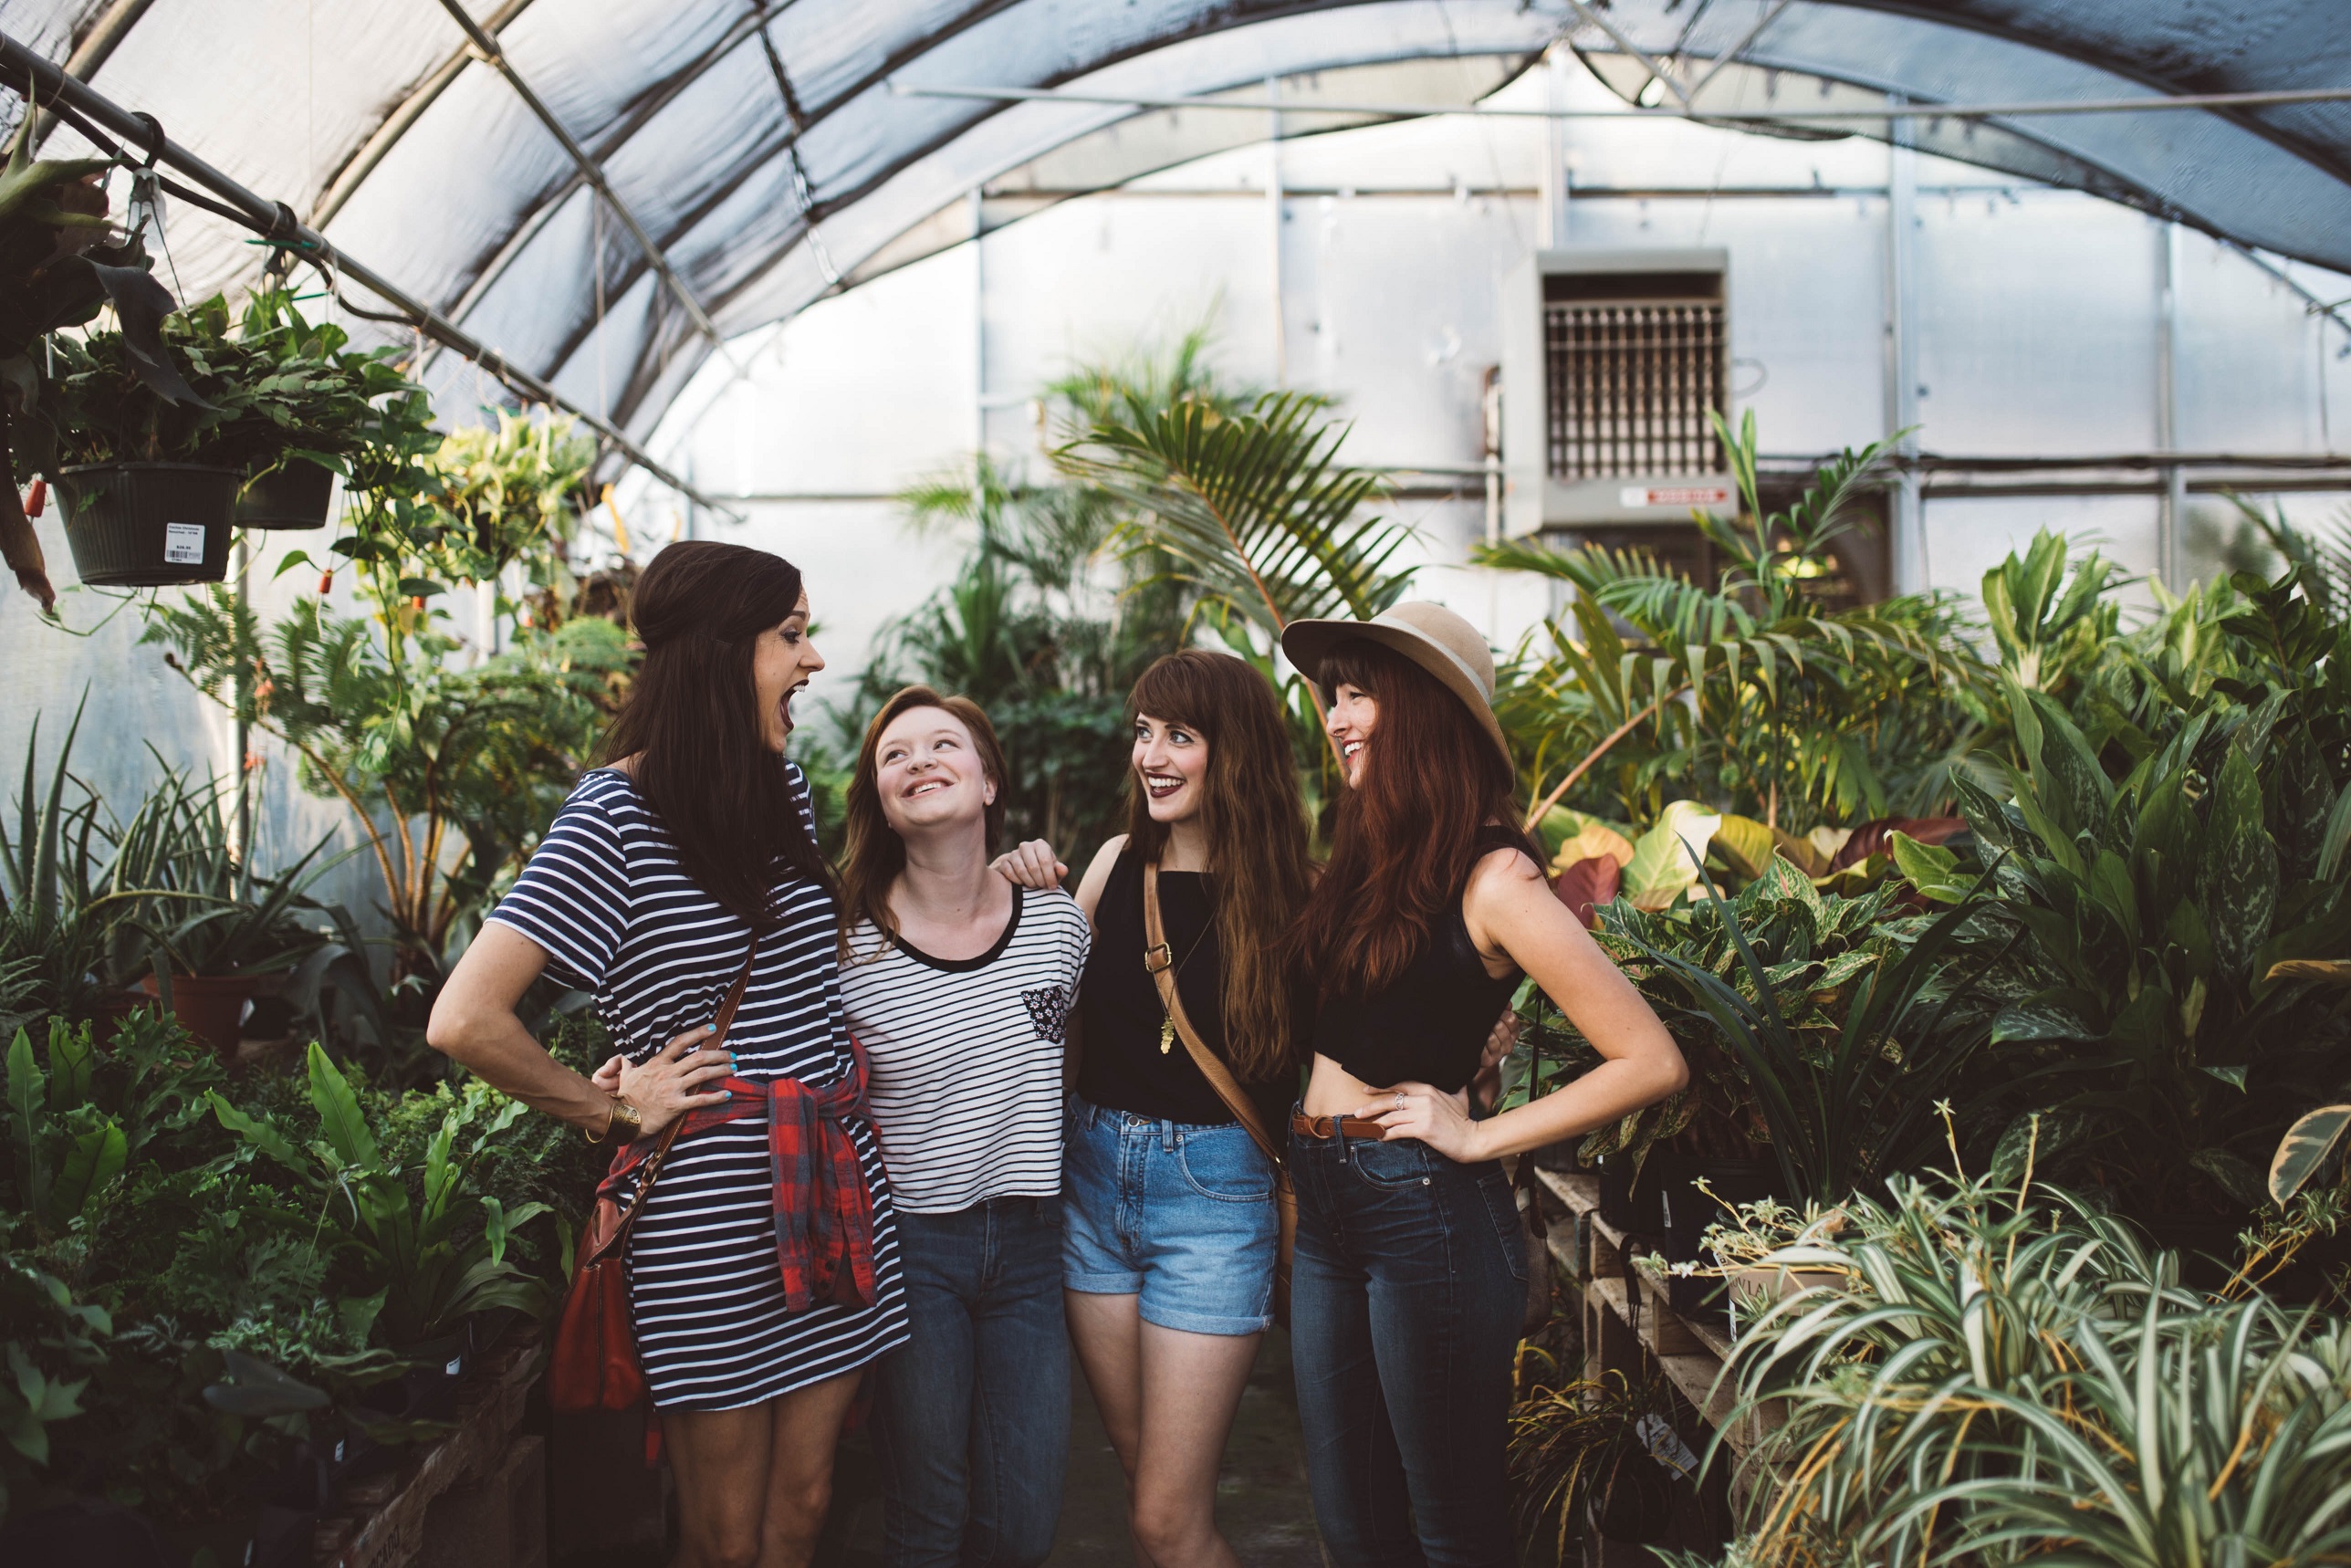 Four women standing together laughing in greenhouse